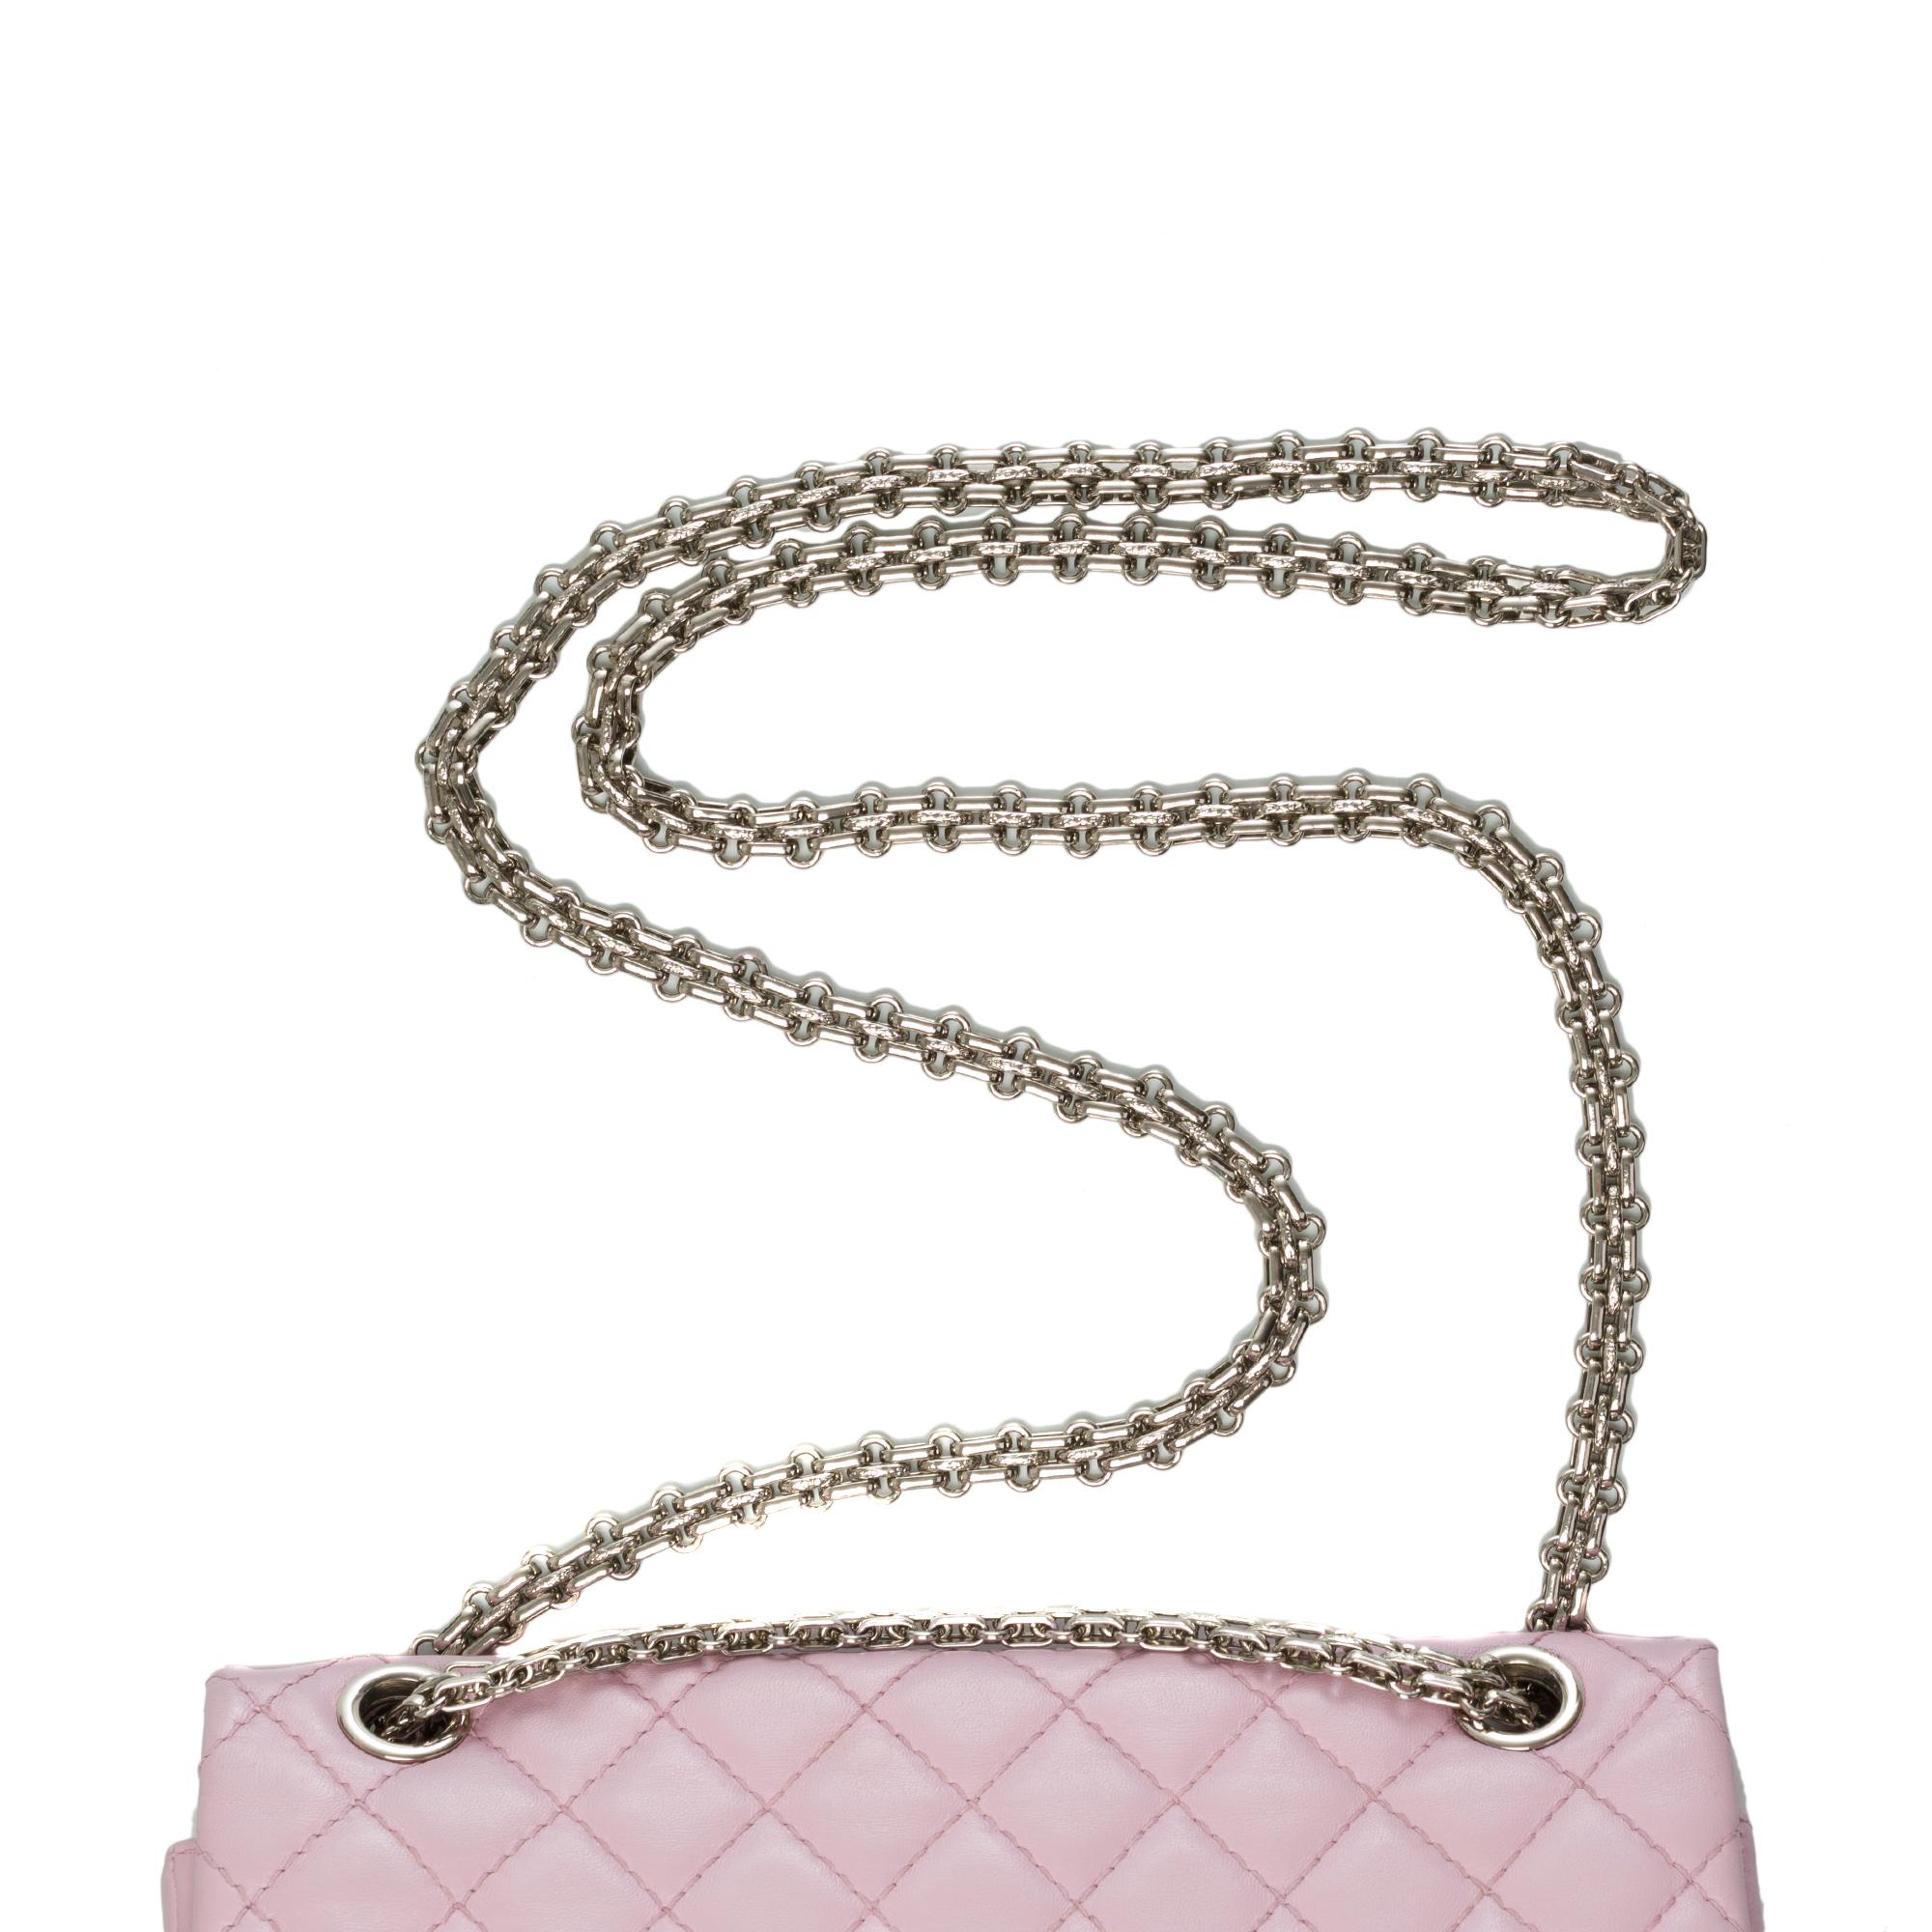 Women's Stunning Chanel 2.55 shoulder bag in pink quilted leather with silver hardware